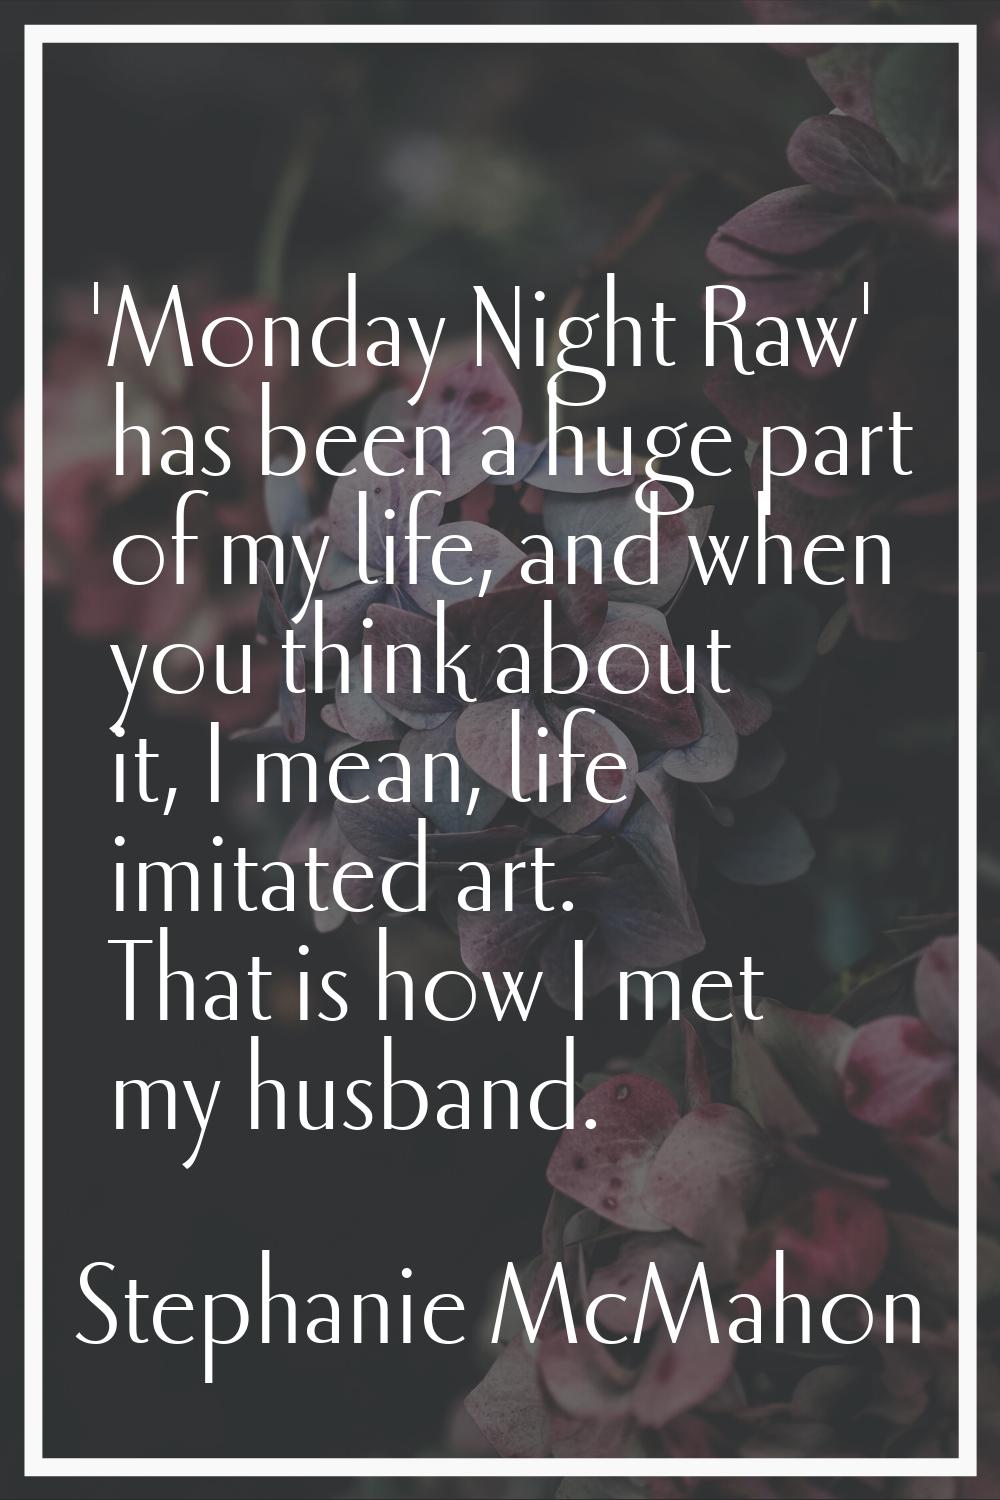 'Monday Night Raw' has been a huge part of my life, and when you think about it, I mean, life imita